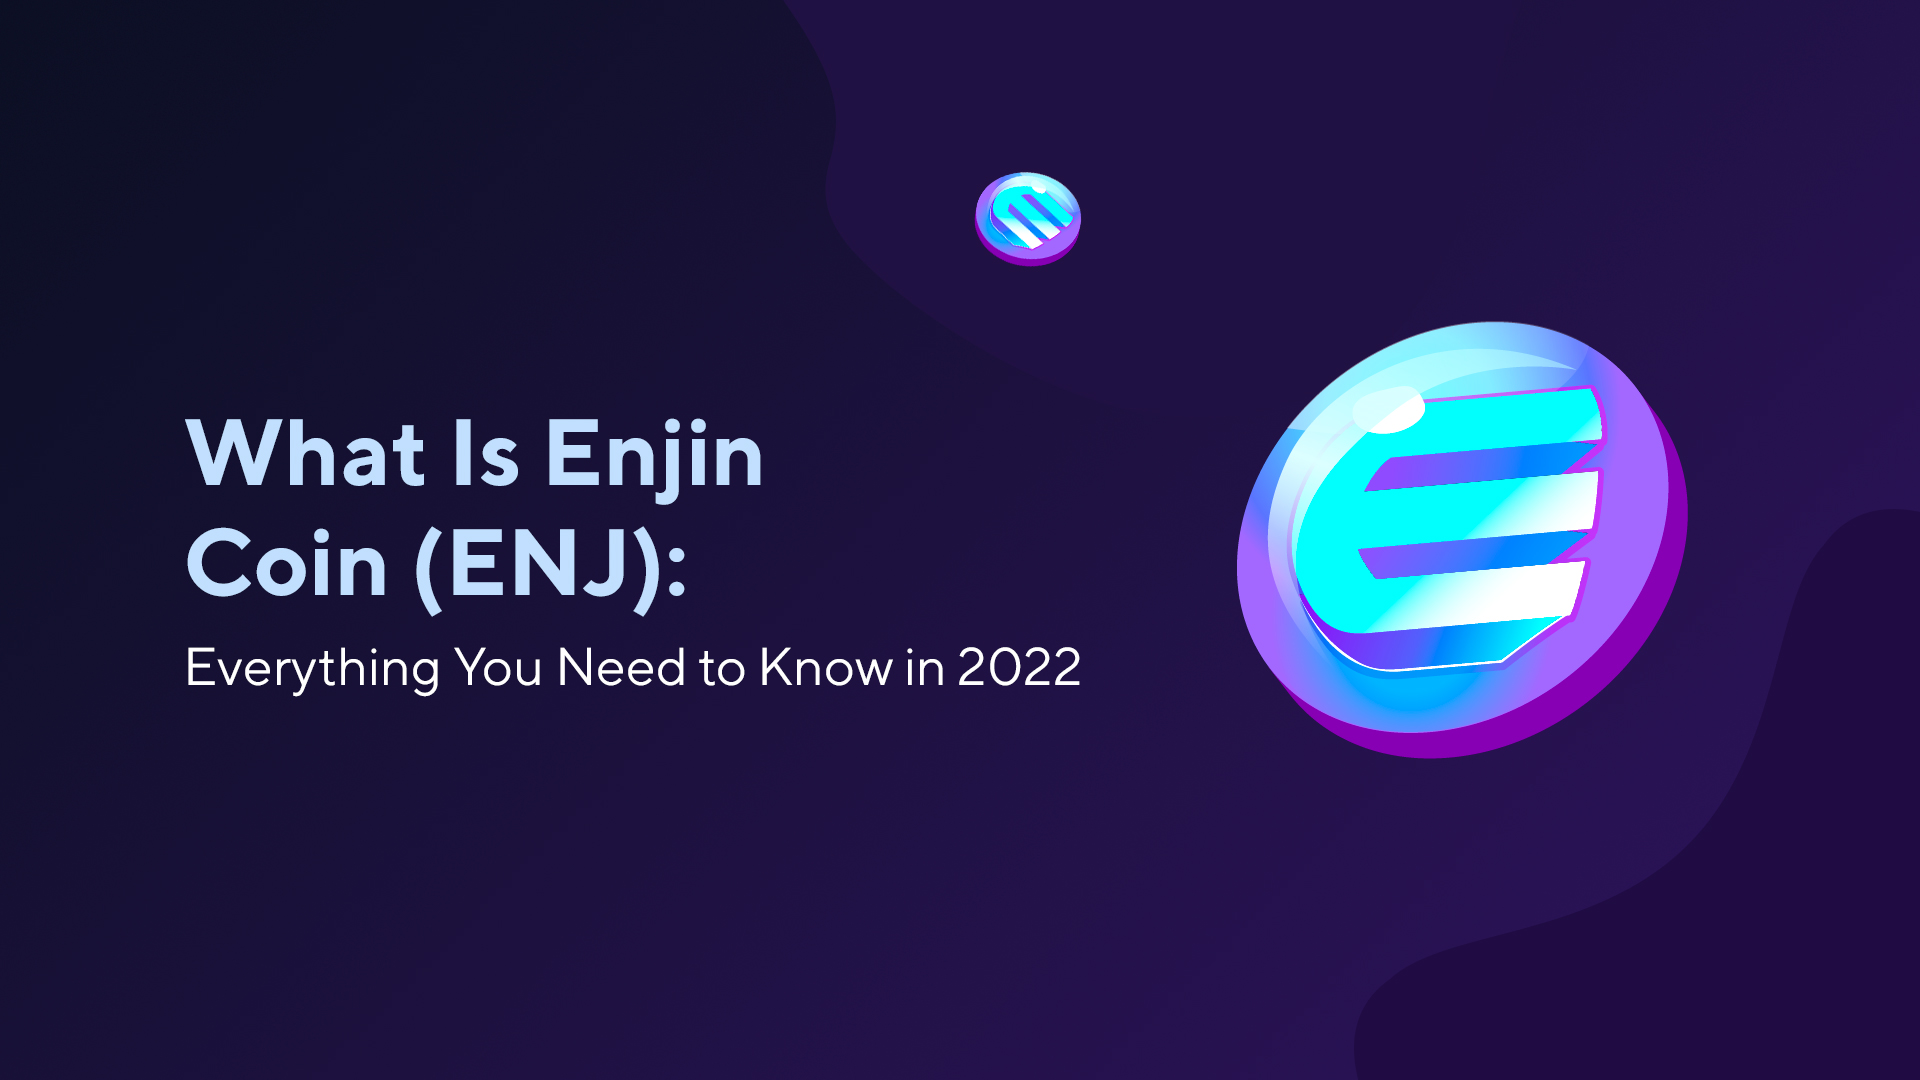 What Is Enjin Coin (ENJ): Everything You Need to Know in 2022